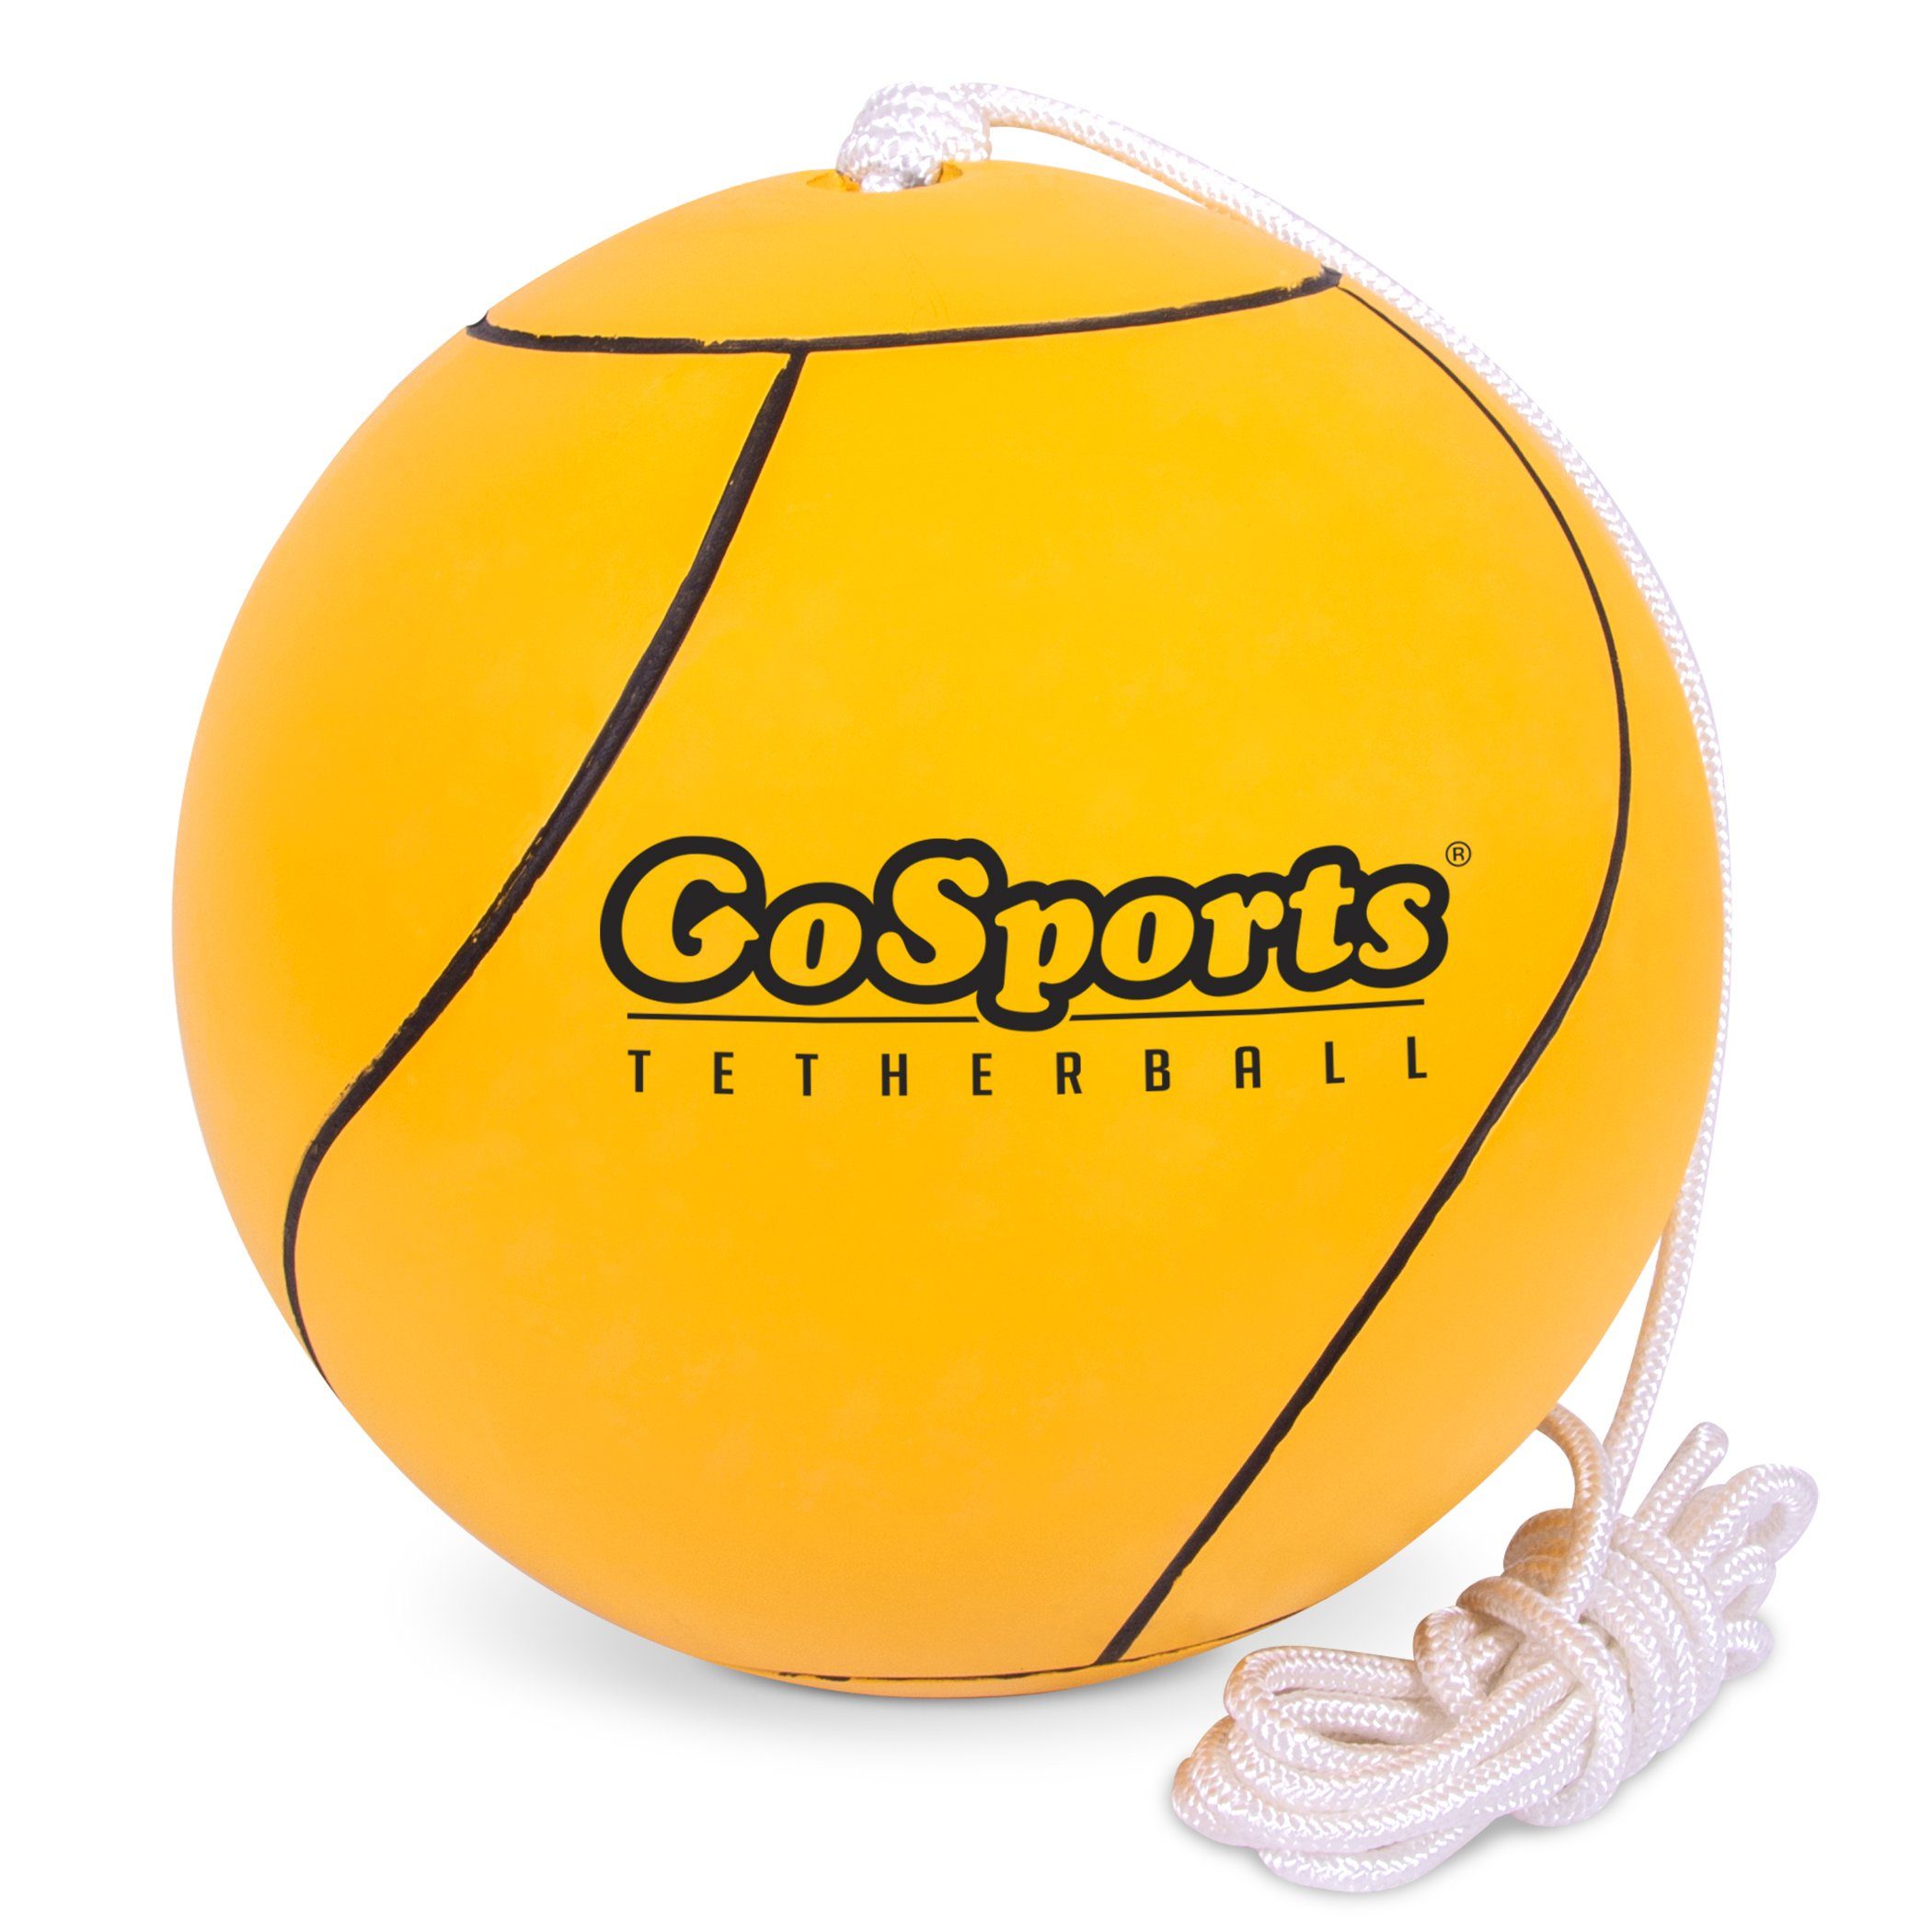 GoSports Tetherball and Rope Replacement Set –